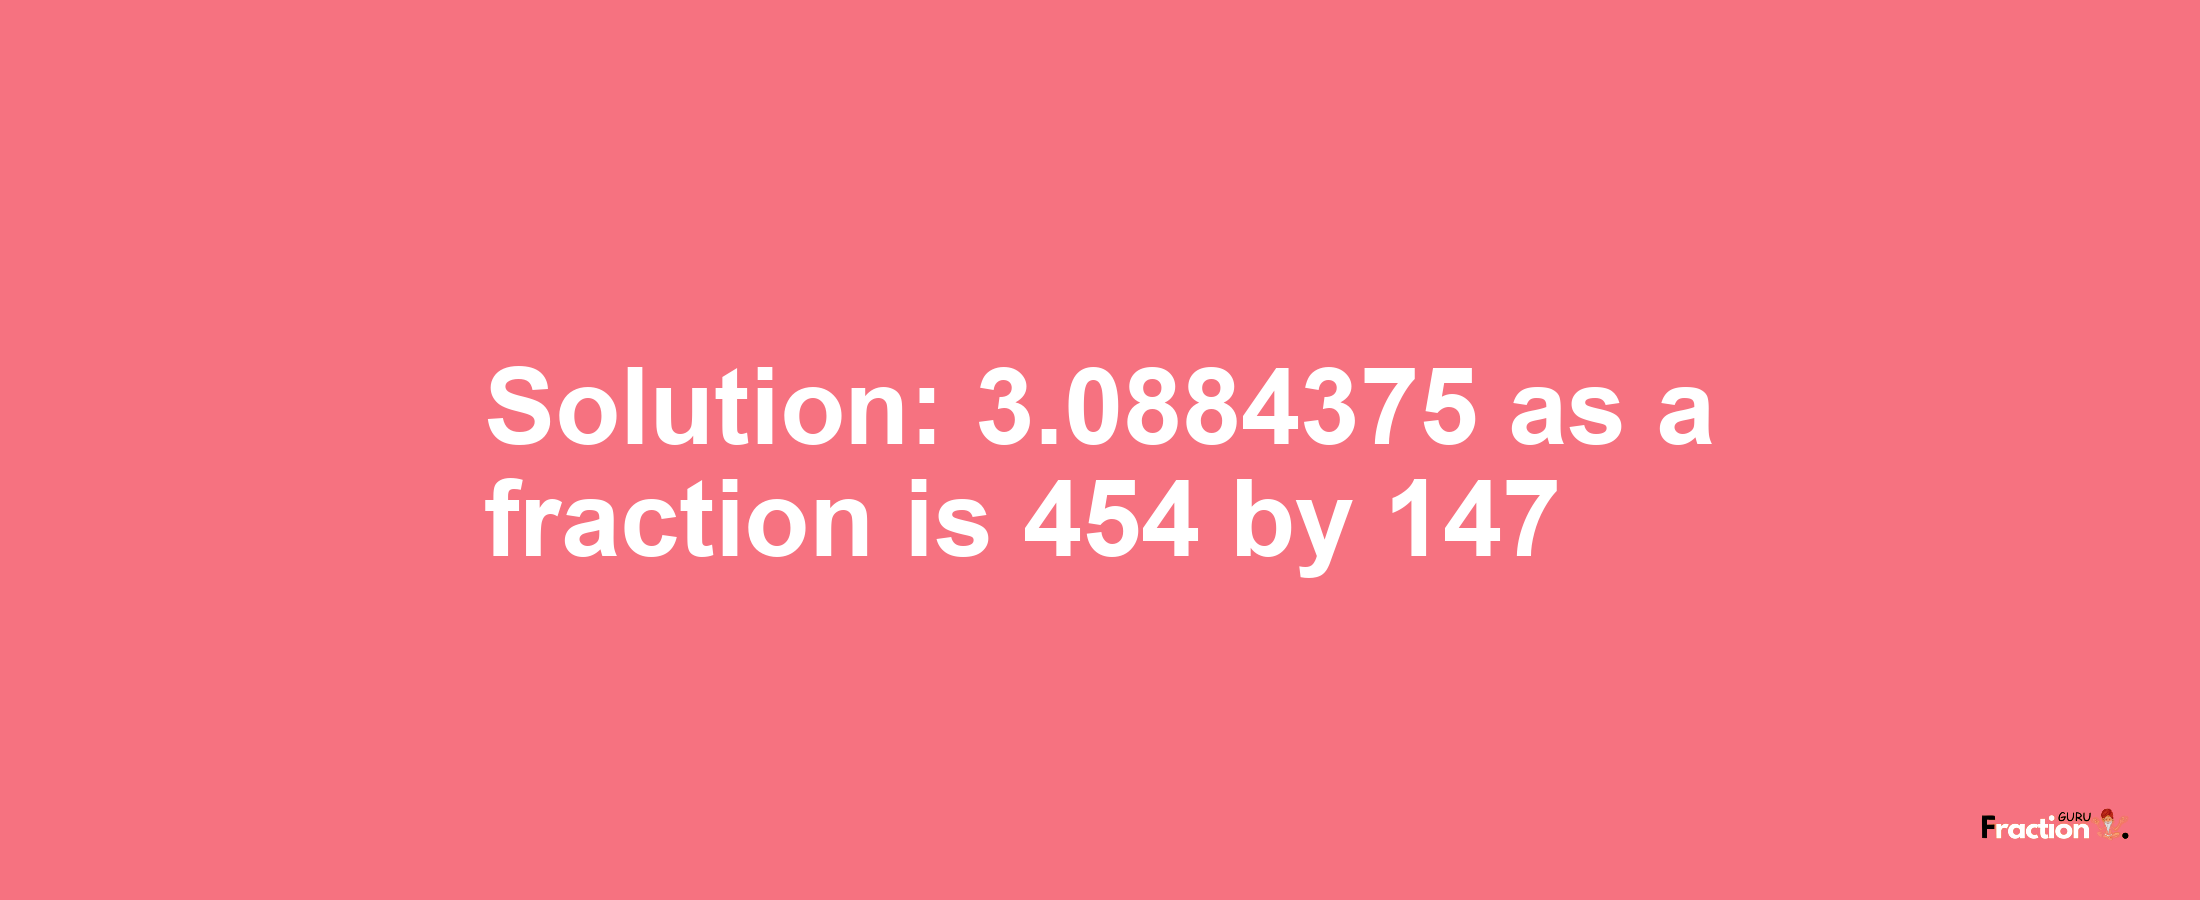 Solution:3.0884375 as a fraction is 454/147